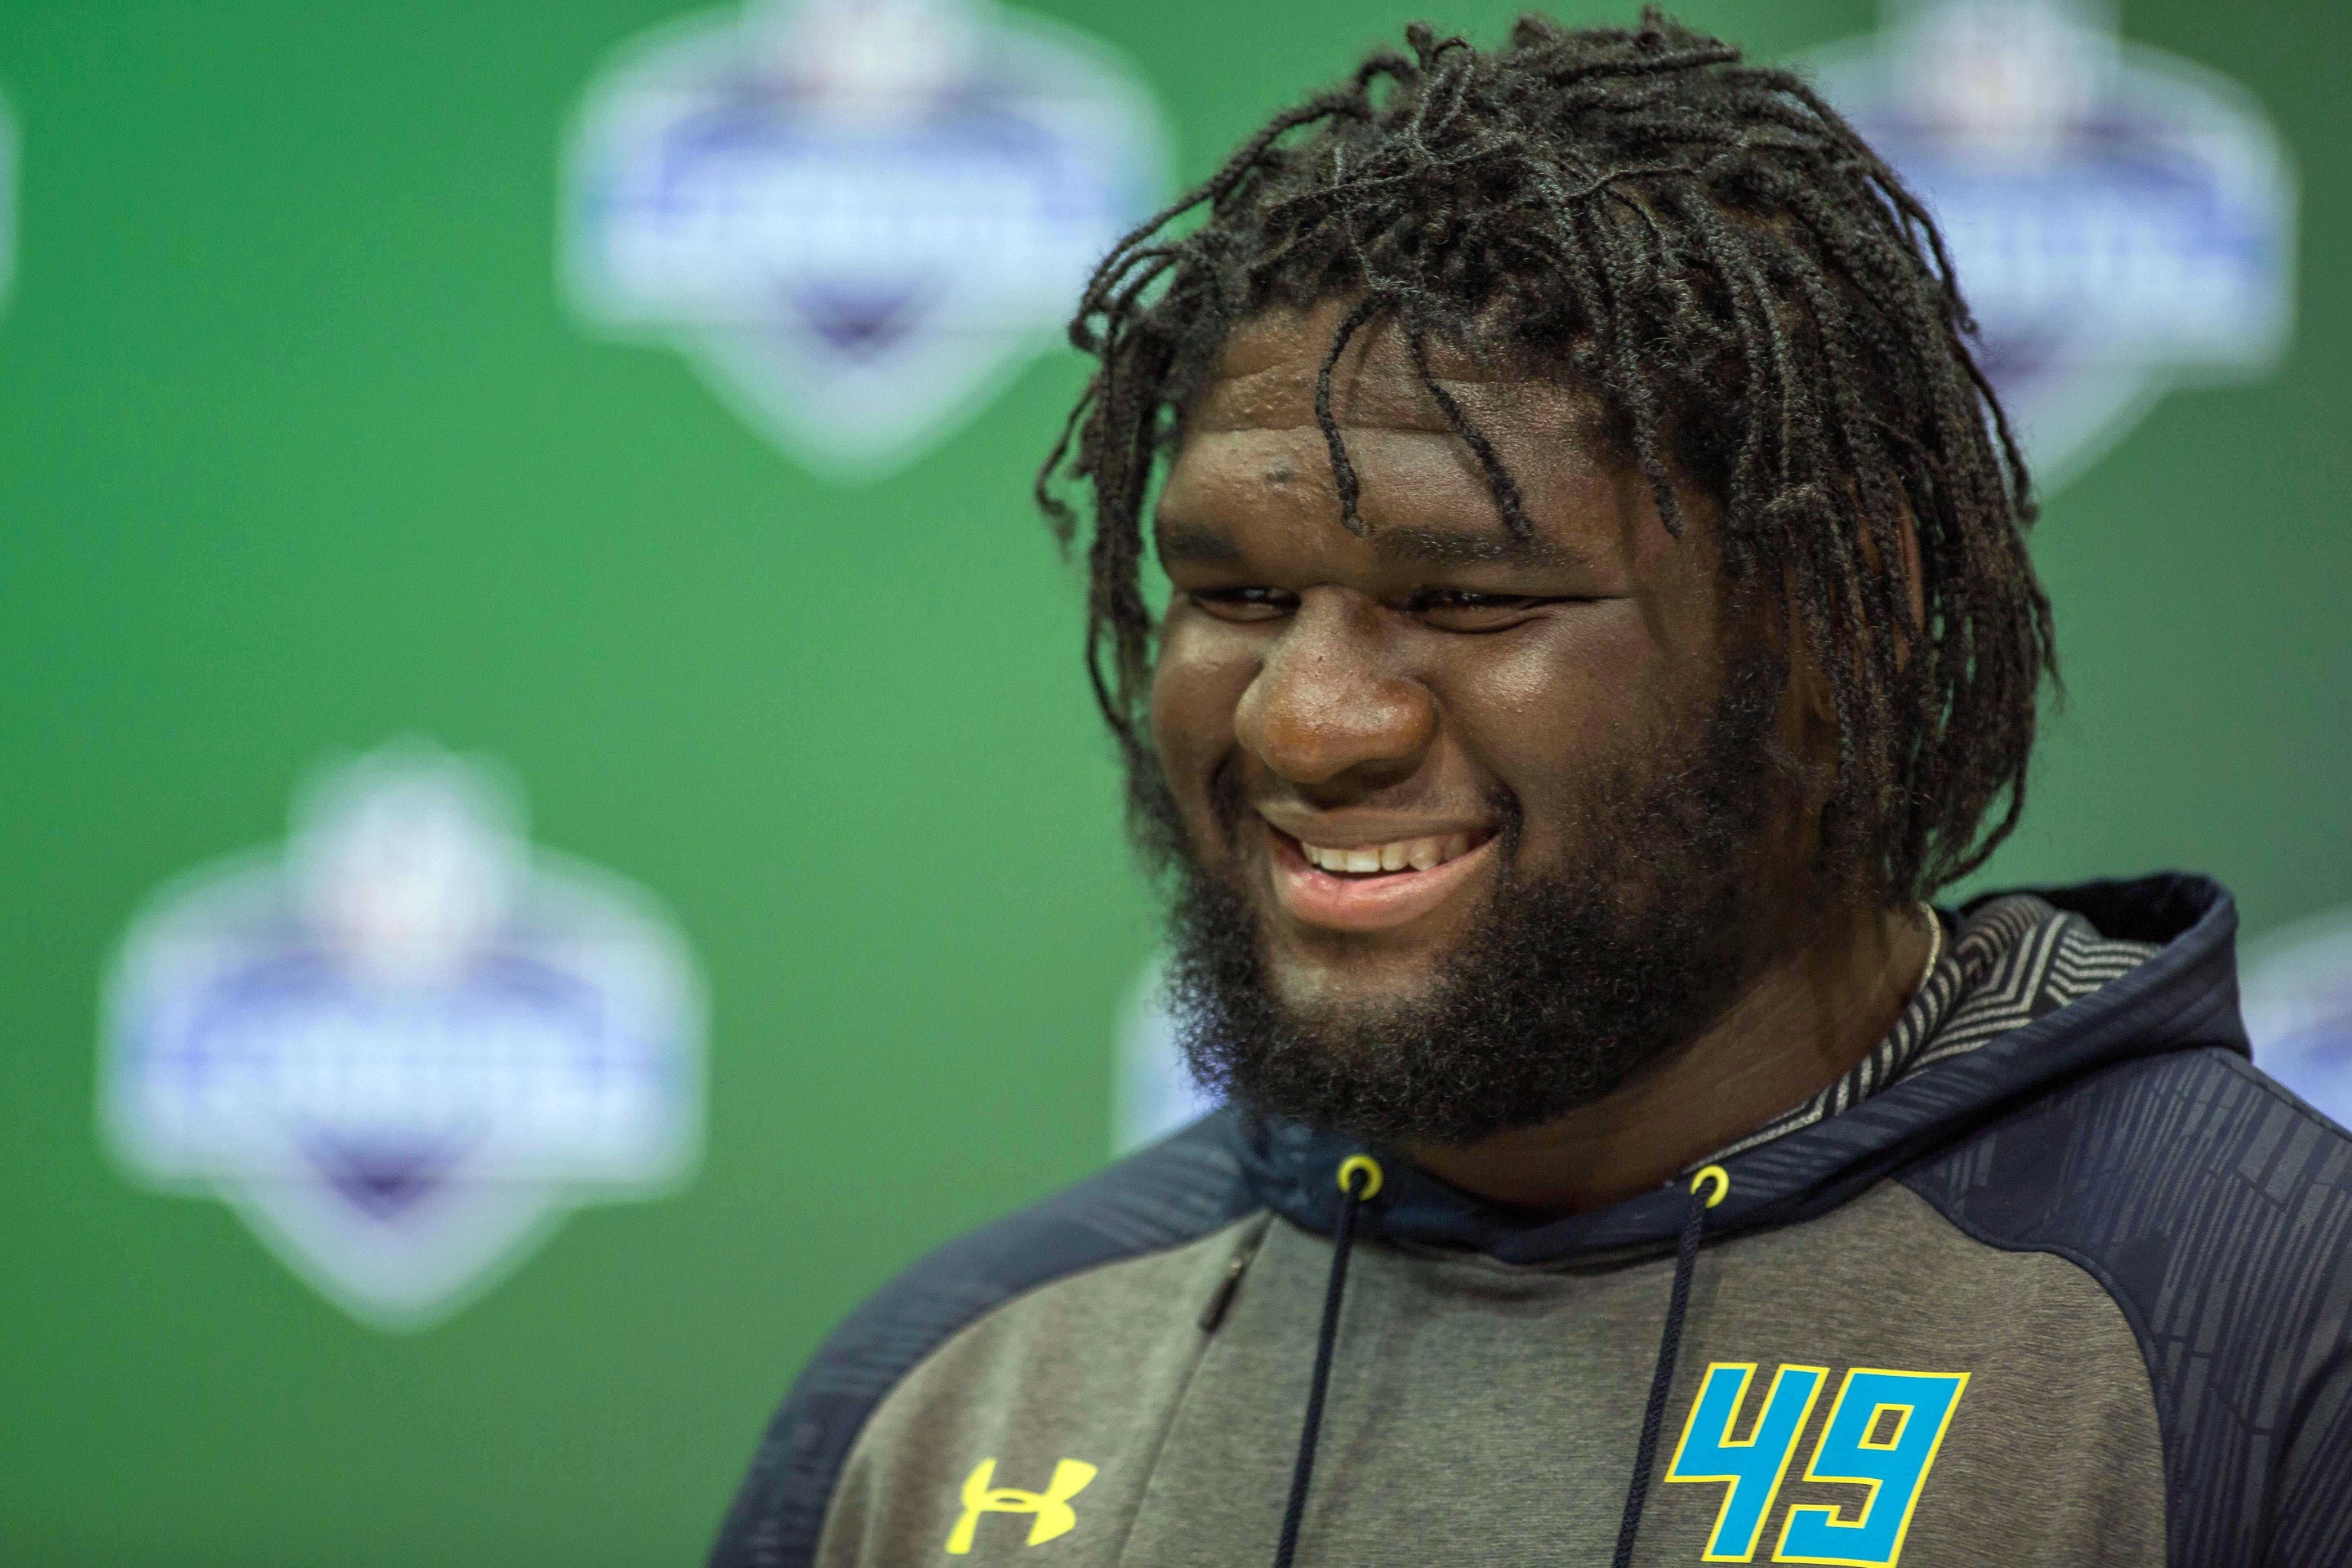 Mar 4, 2017; Indianapolis, IN, USA; Alabama defensive tackle Dalvin Tomlinson speaks to the media during the 2017 combine at Indiana Convention Center. Mandatory Credit: Trevor Ruszkowski-USA TODAY Sports